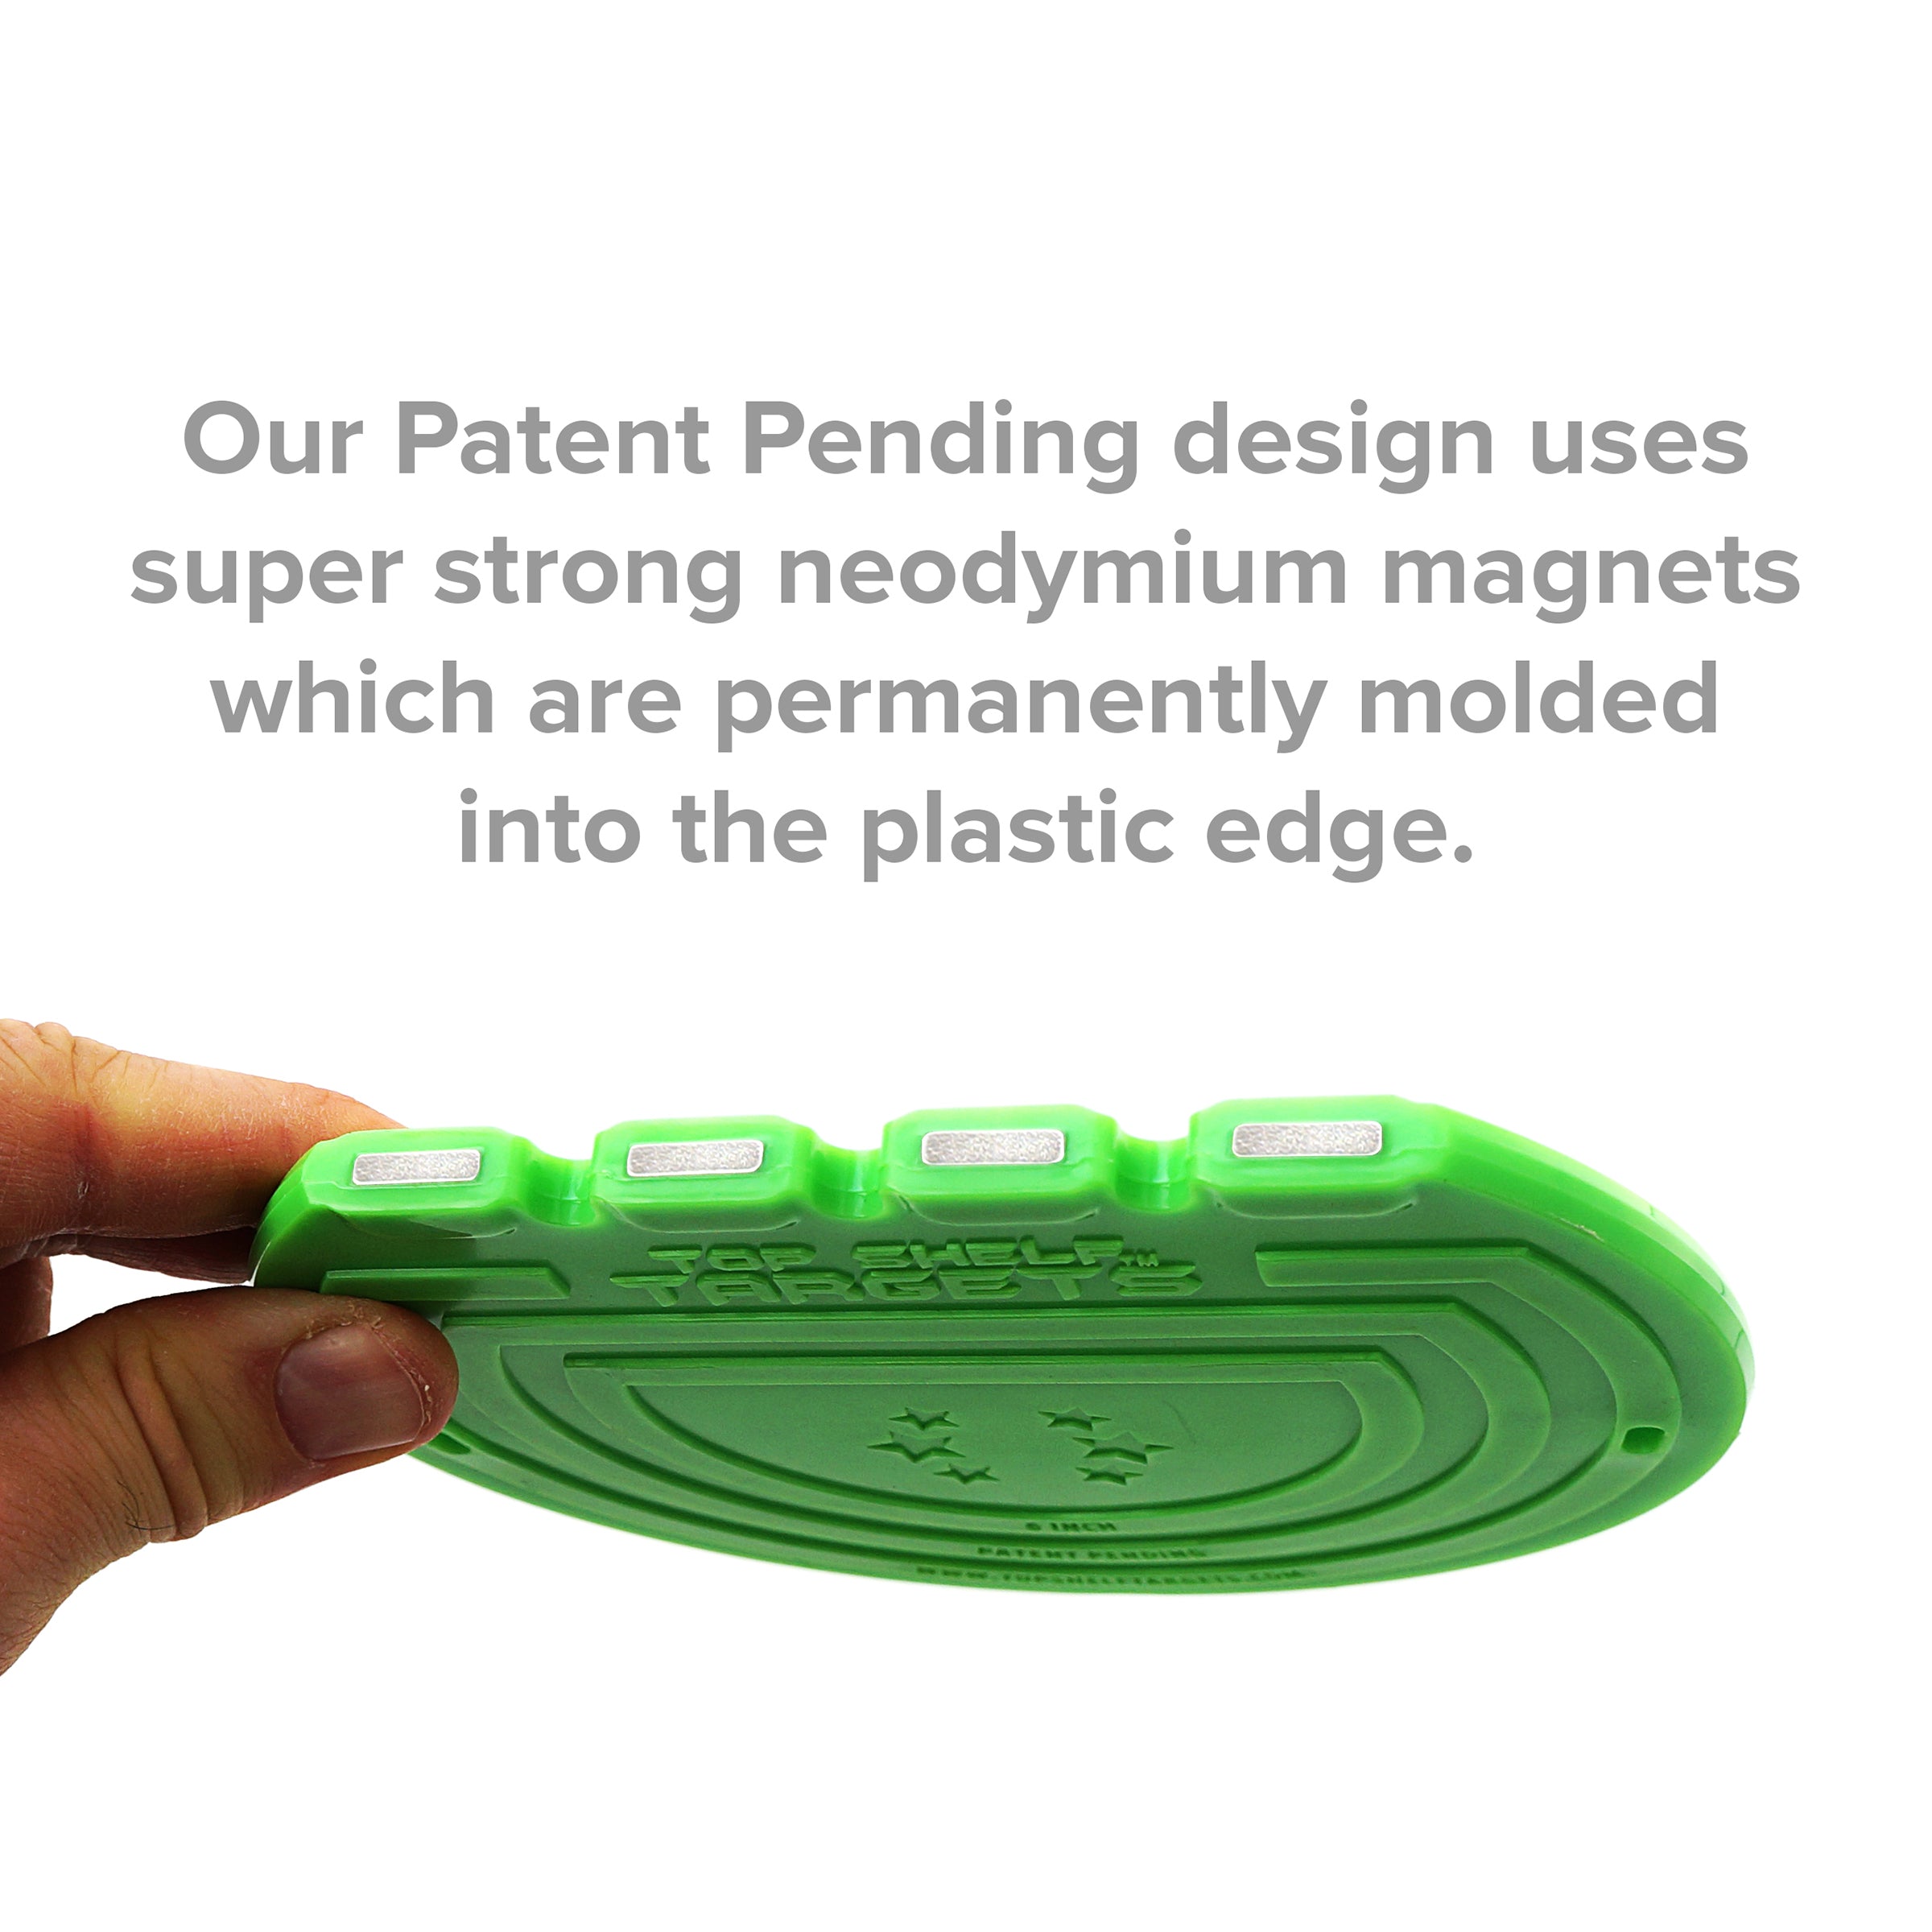 Our patent pending design uses super strong neodymium magnets molded into the plastic